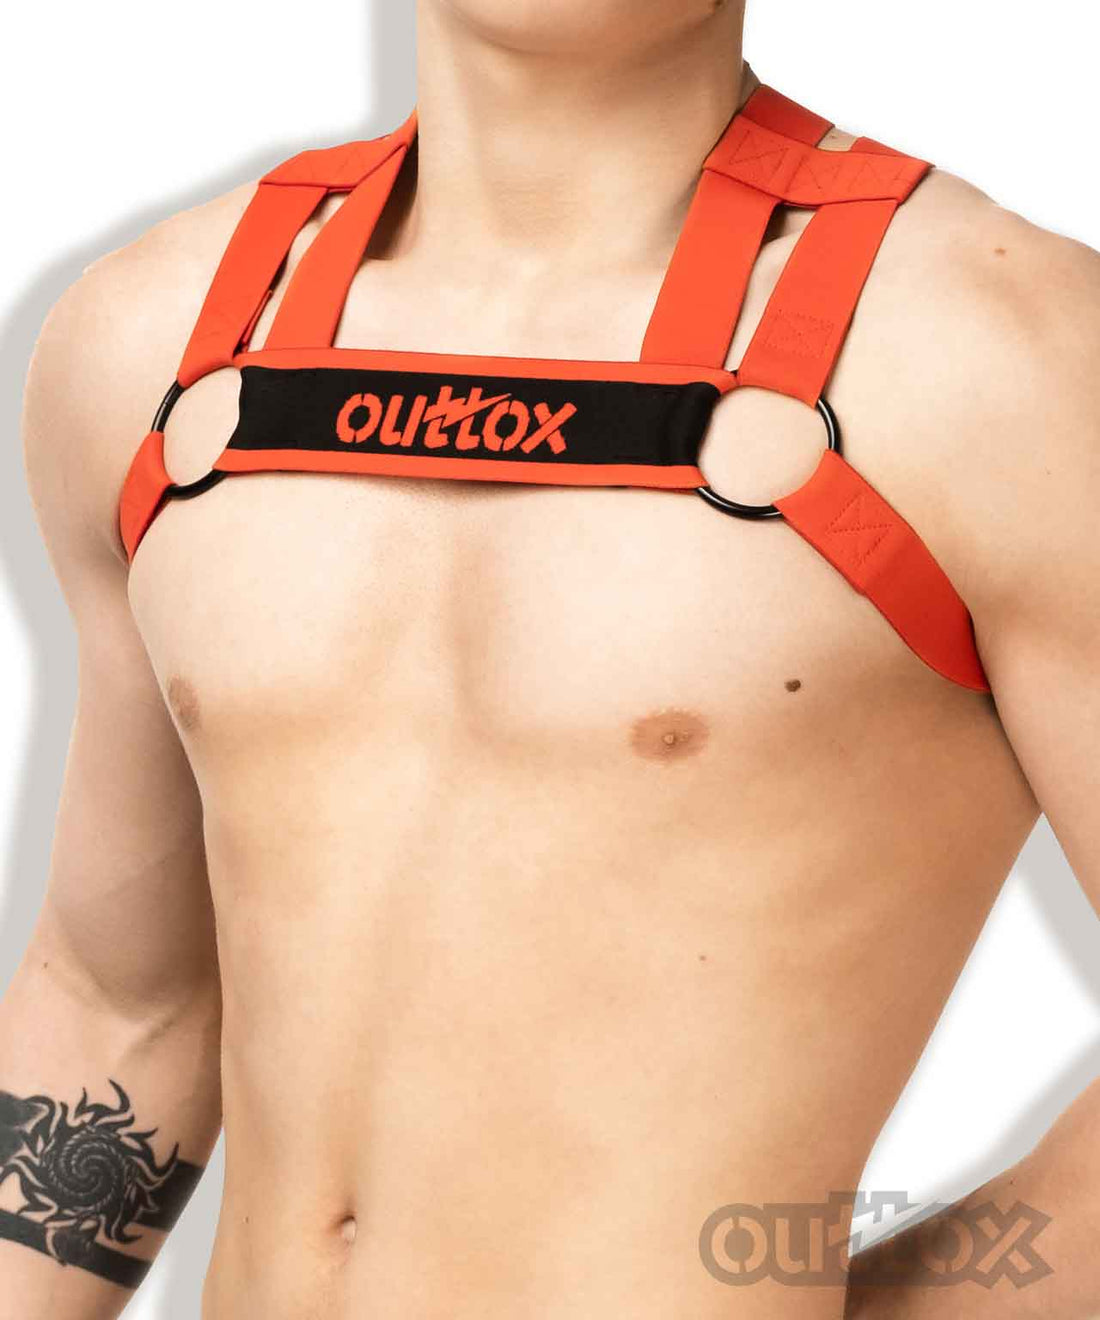 Outtox. Bulldog harness. Red